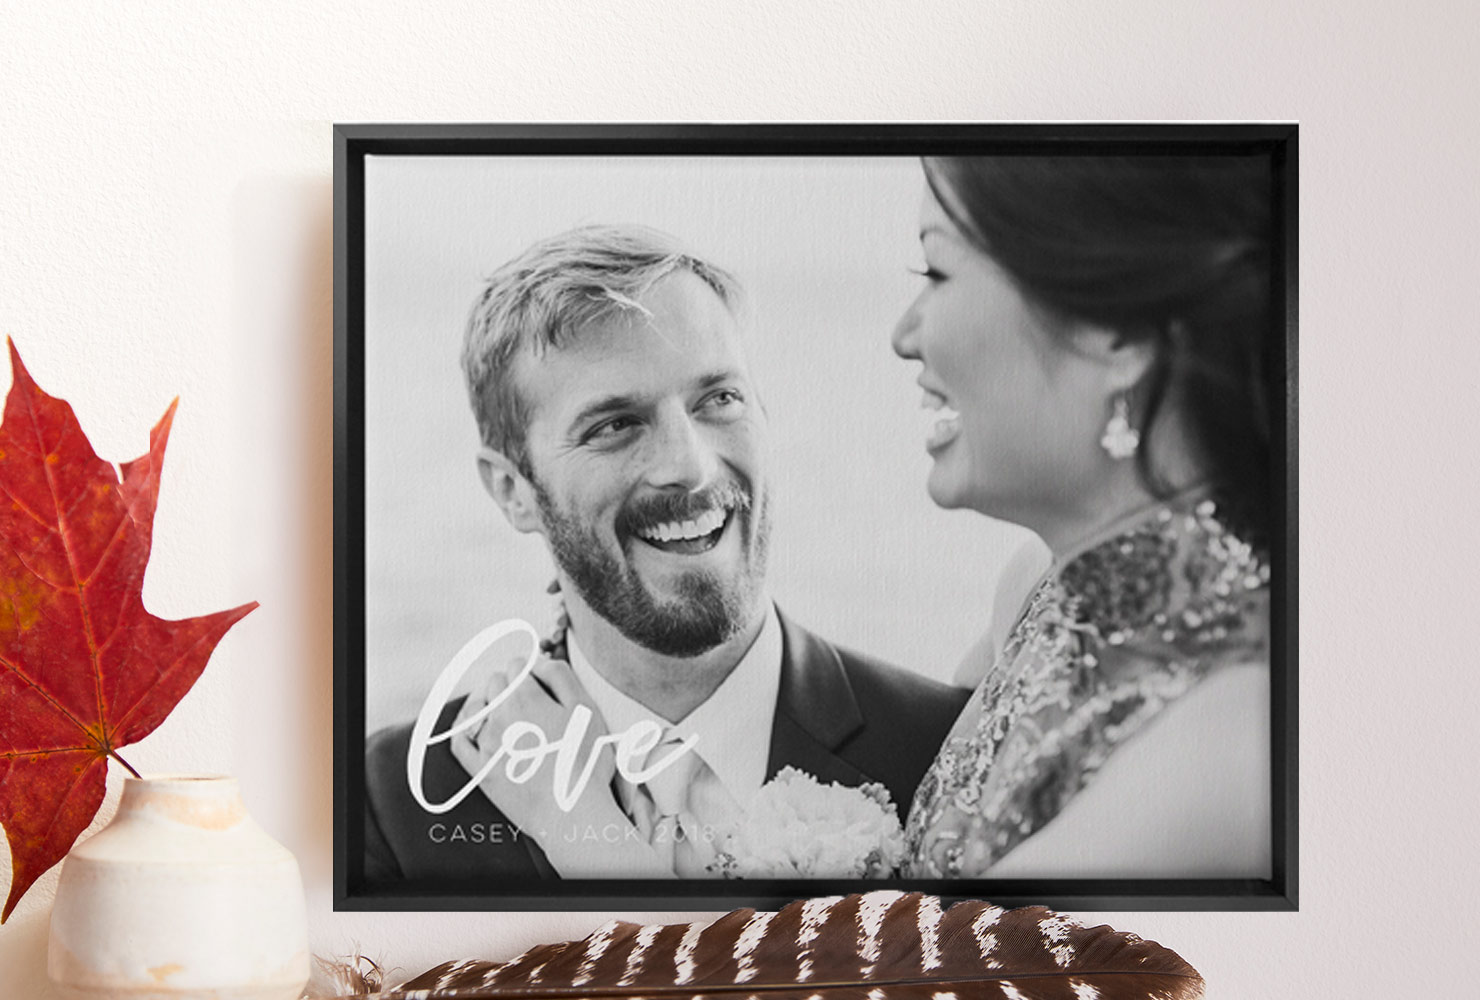 Black and white wedding photo canvas print of young couple for valentine's day